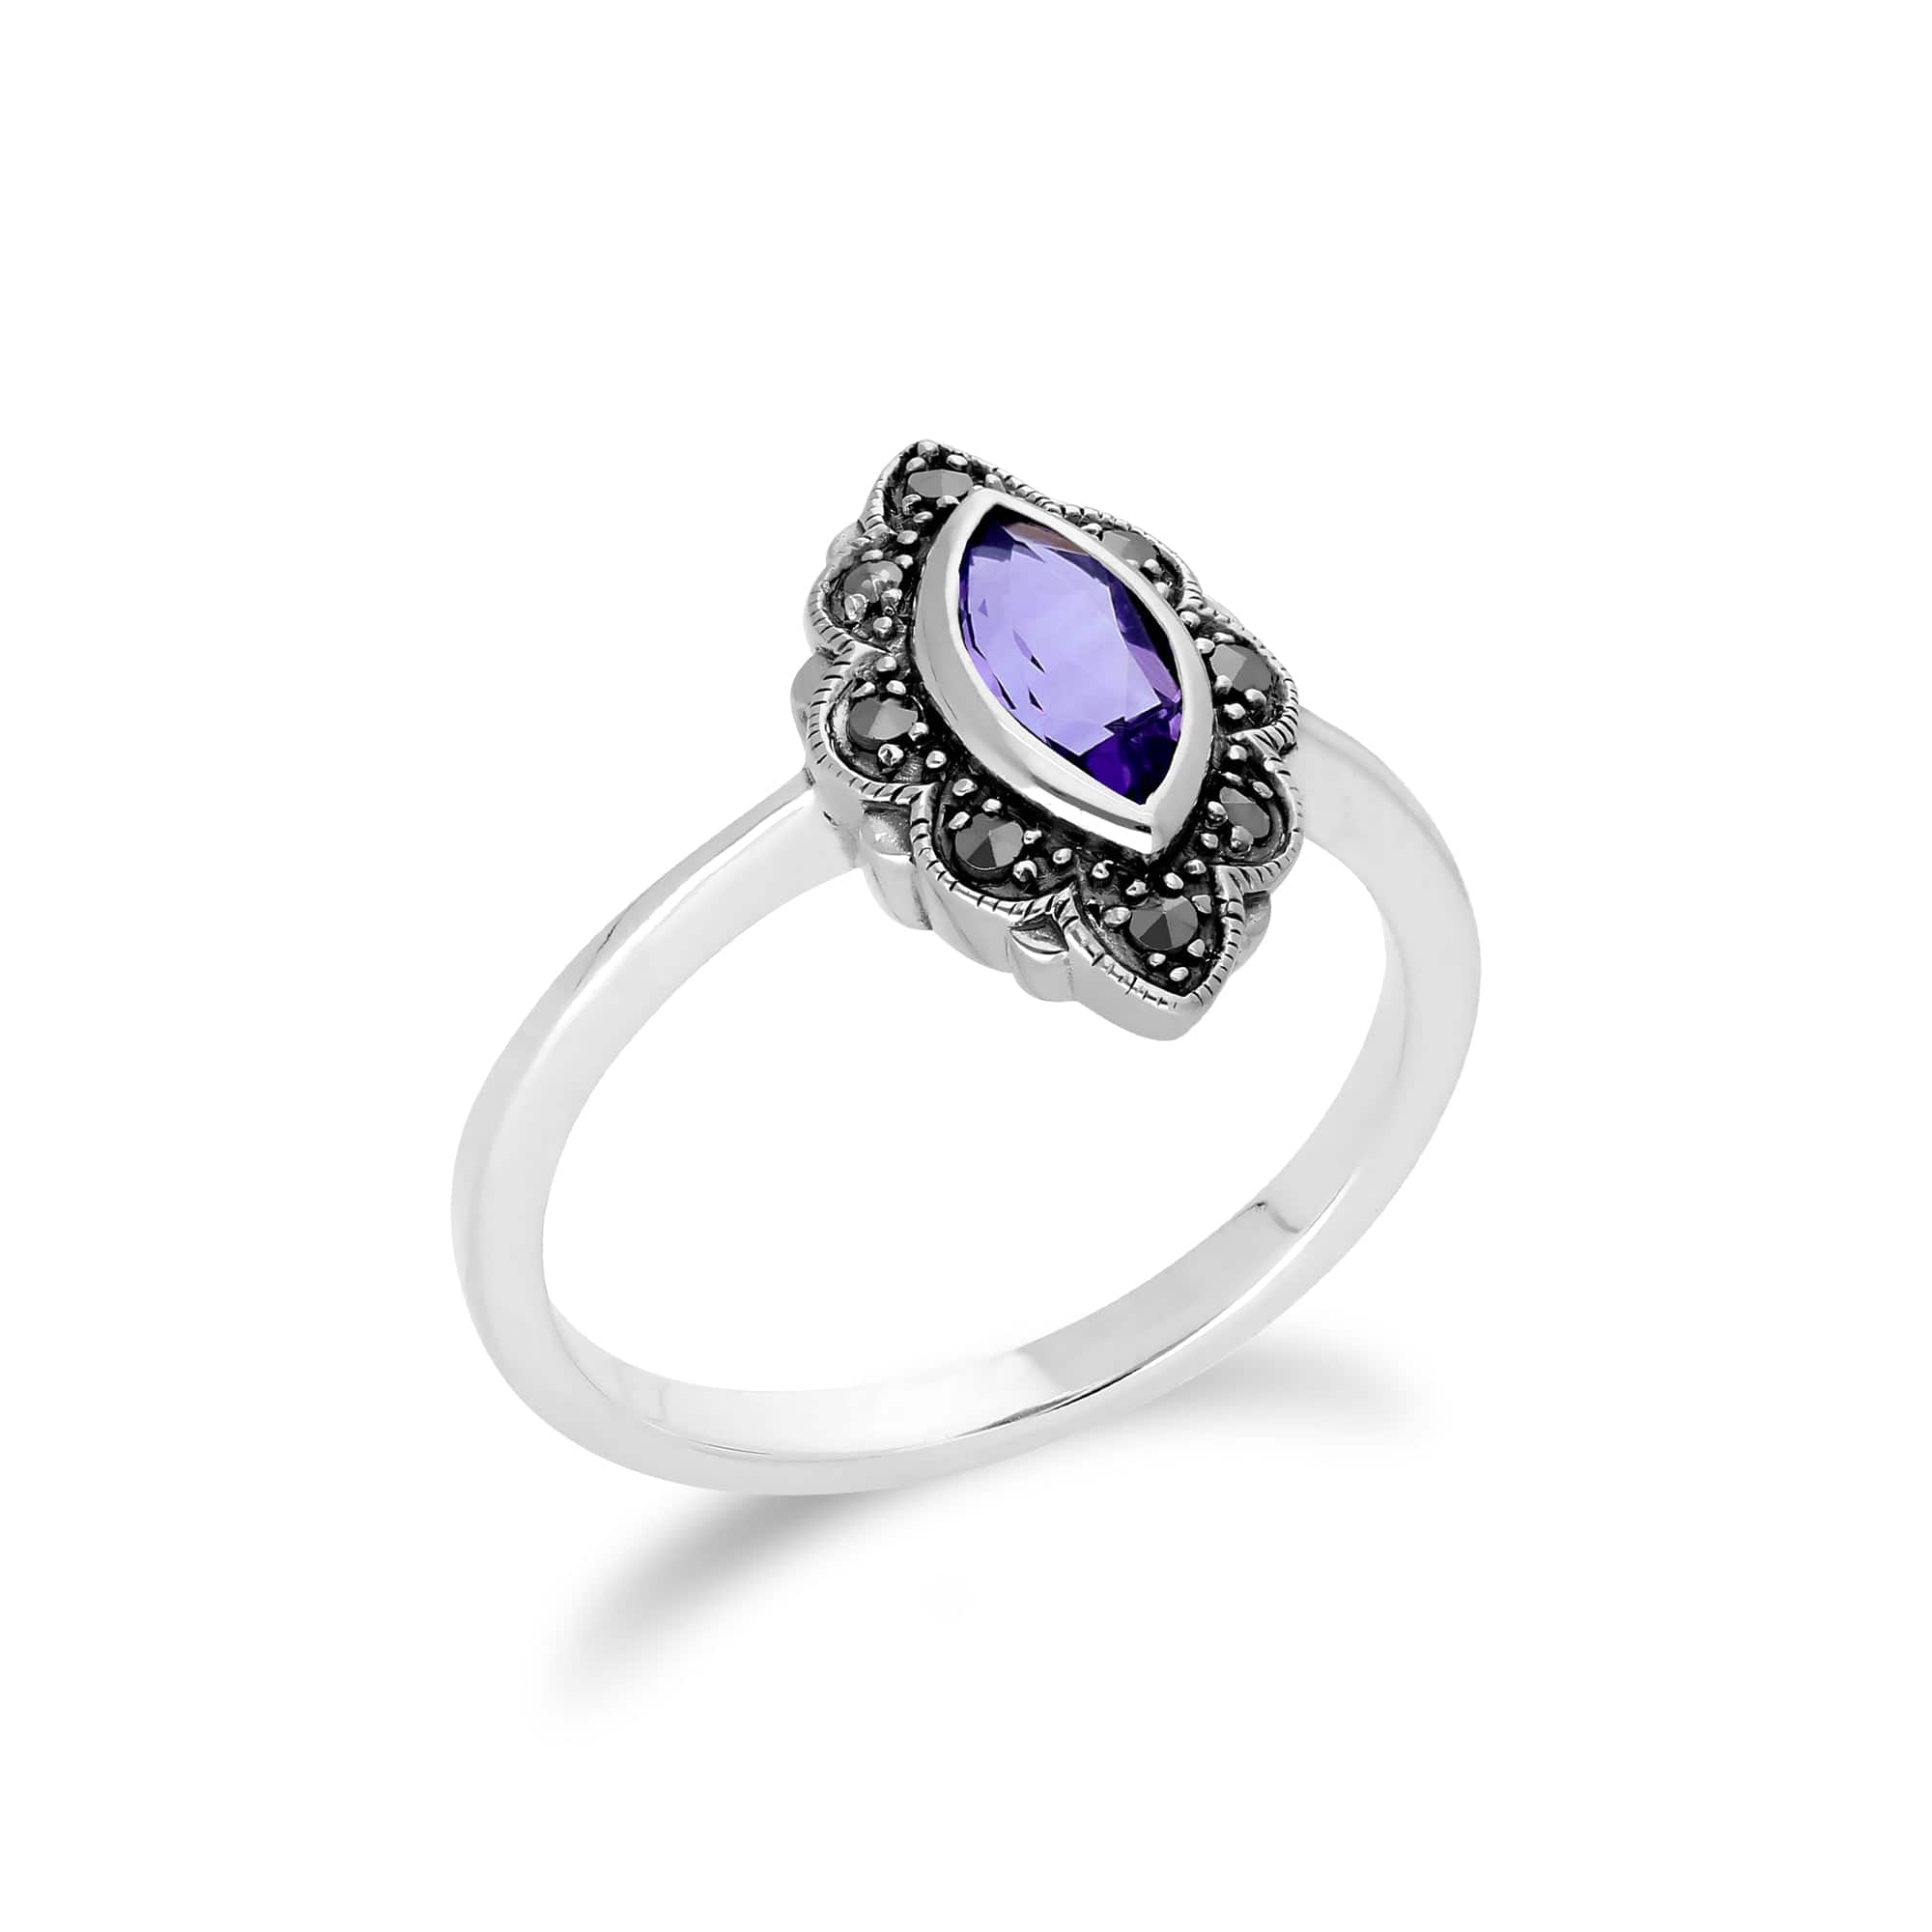 Art Nouveau Marquise Amethyst & Marcasite Leaf Ring in 925 Sterling Silver